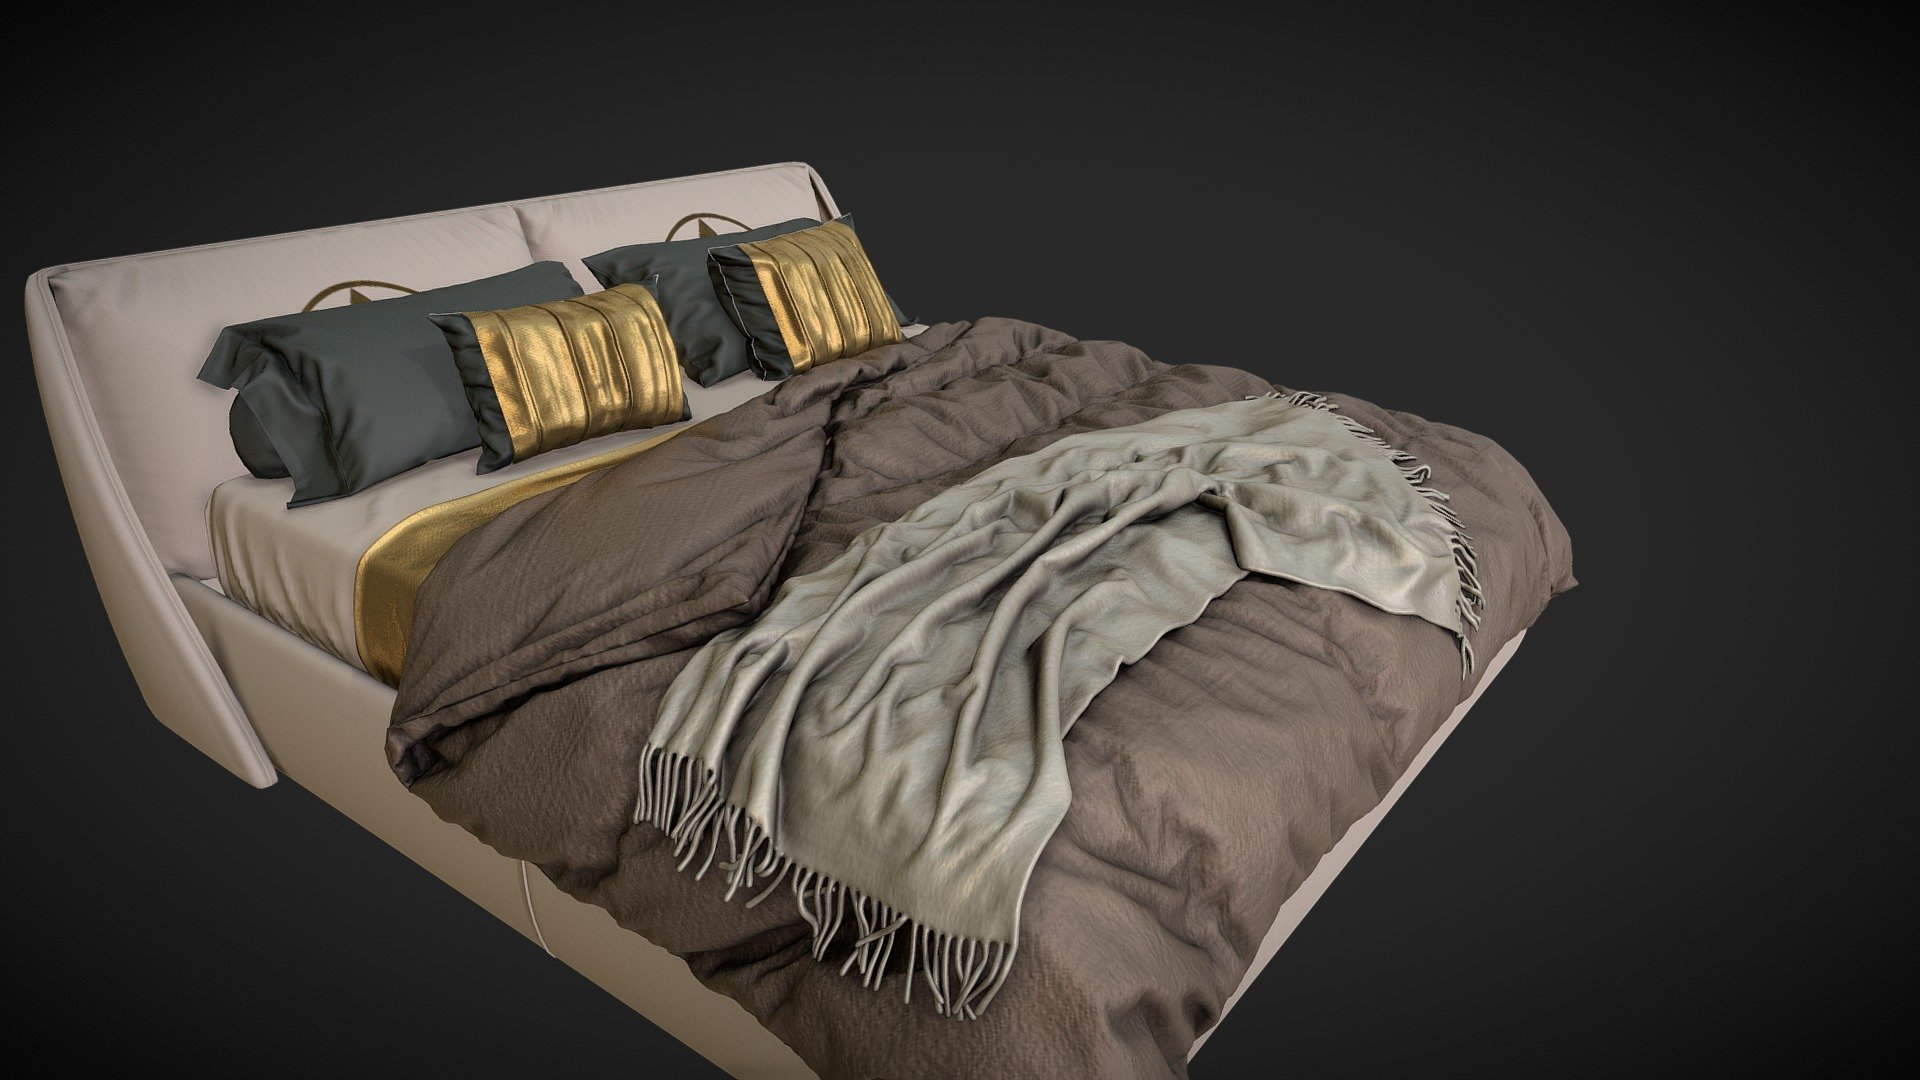 Reworked materials and polygons of 3d model of the double bed for modern and contemporary setting and optimized and ready for any unreal project or unity or lumion project for archviz or game 3d model